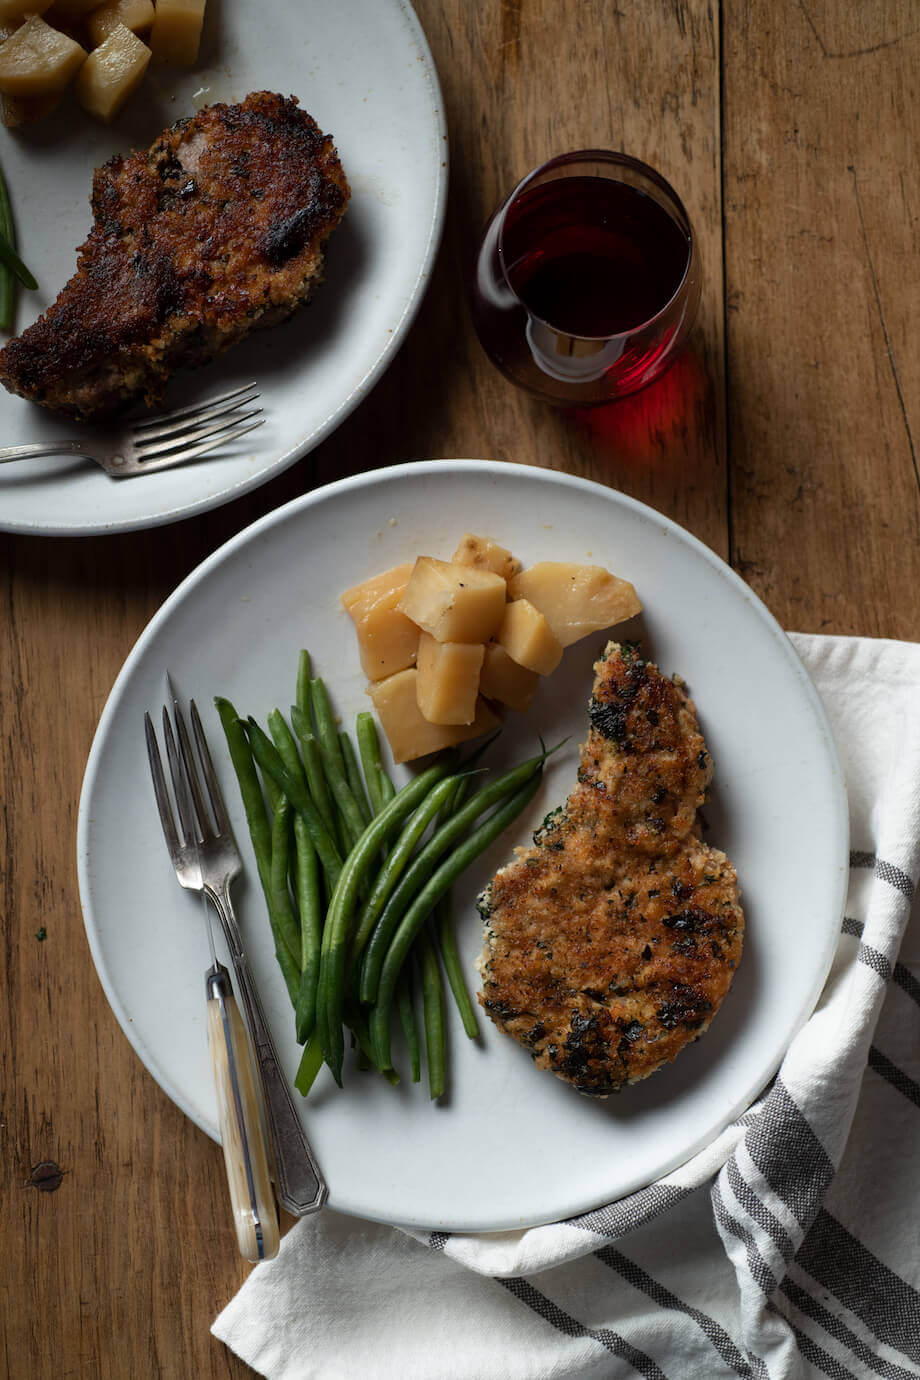 Herb crusted porkchop on a white plate with potatoes and green beans